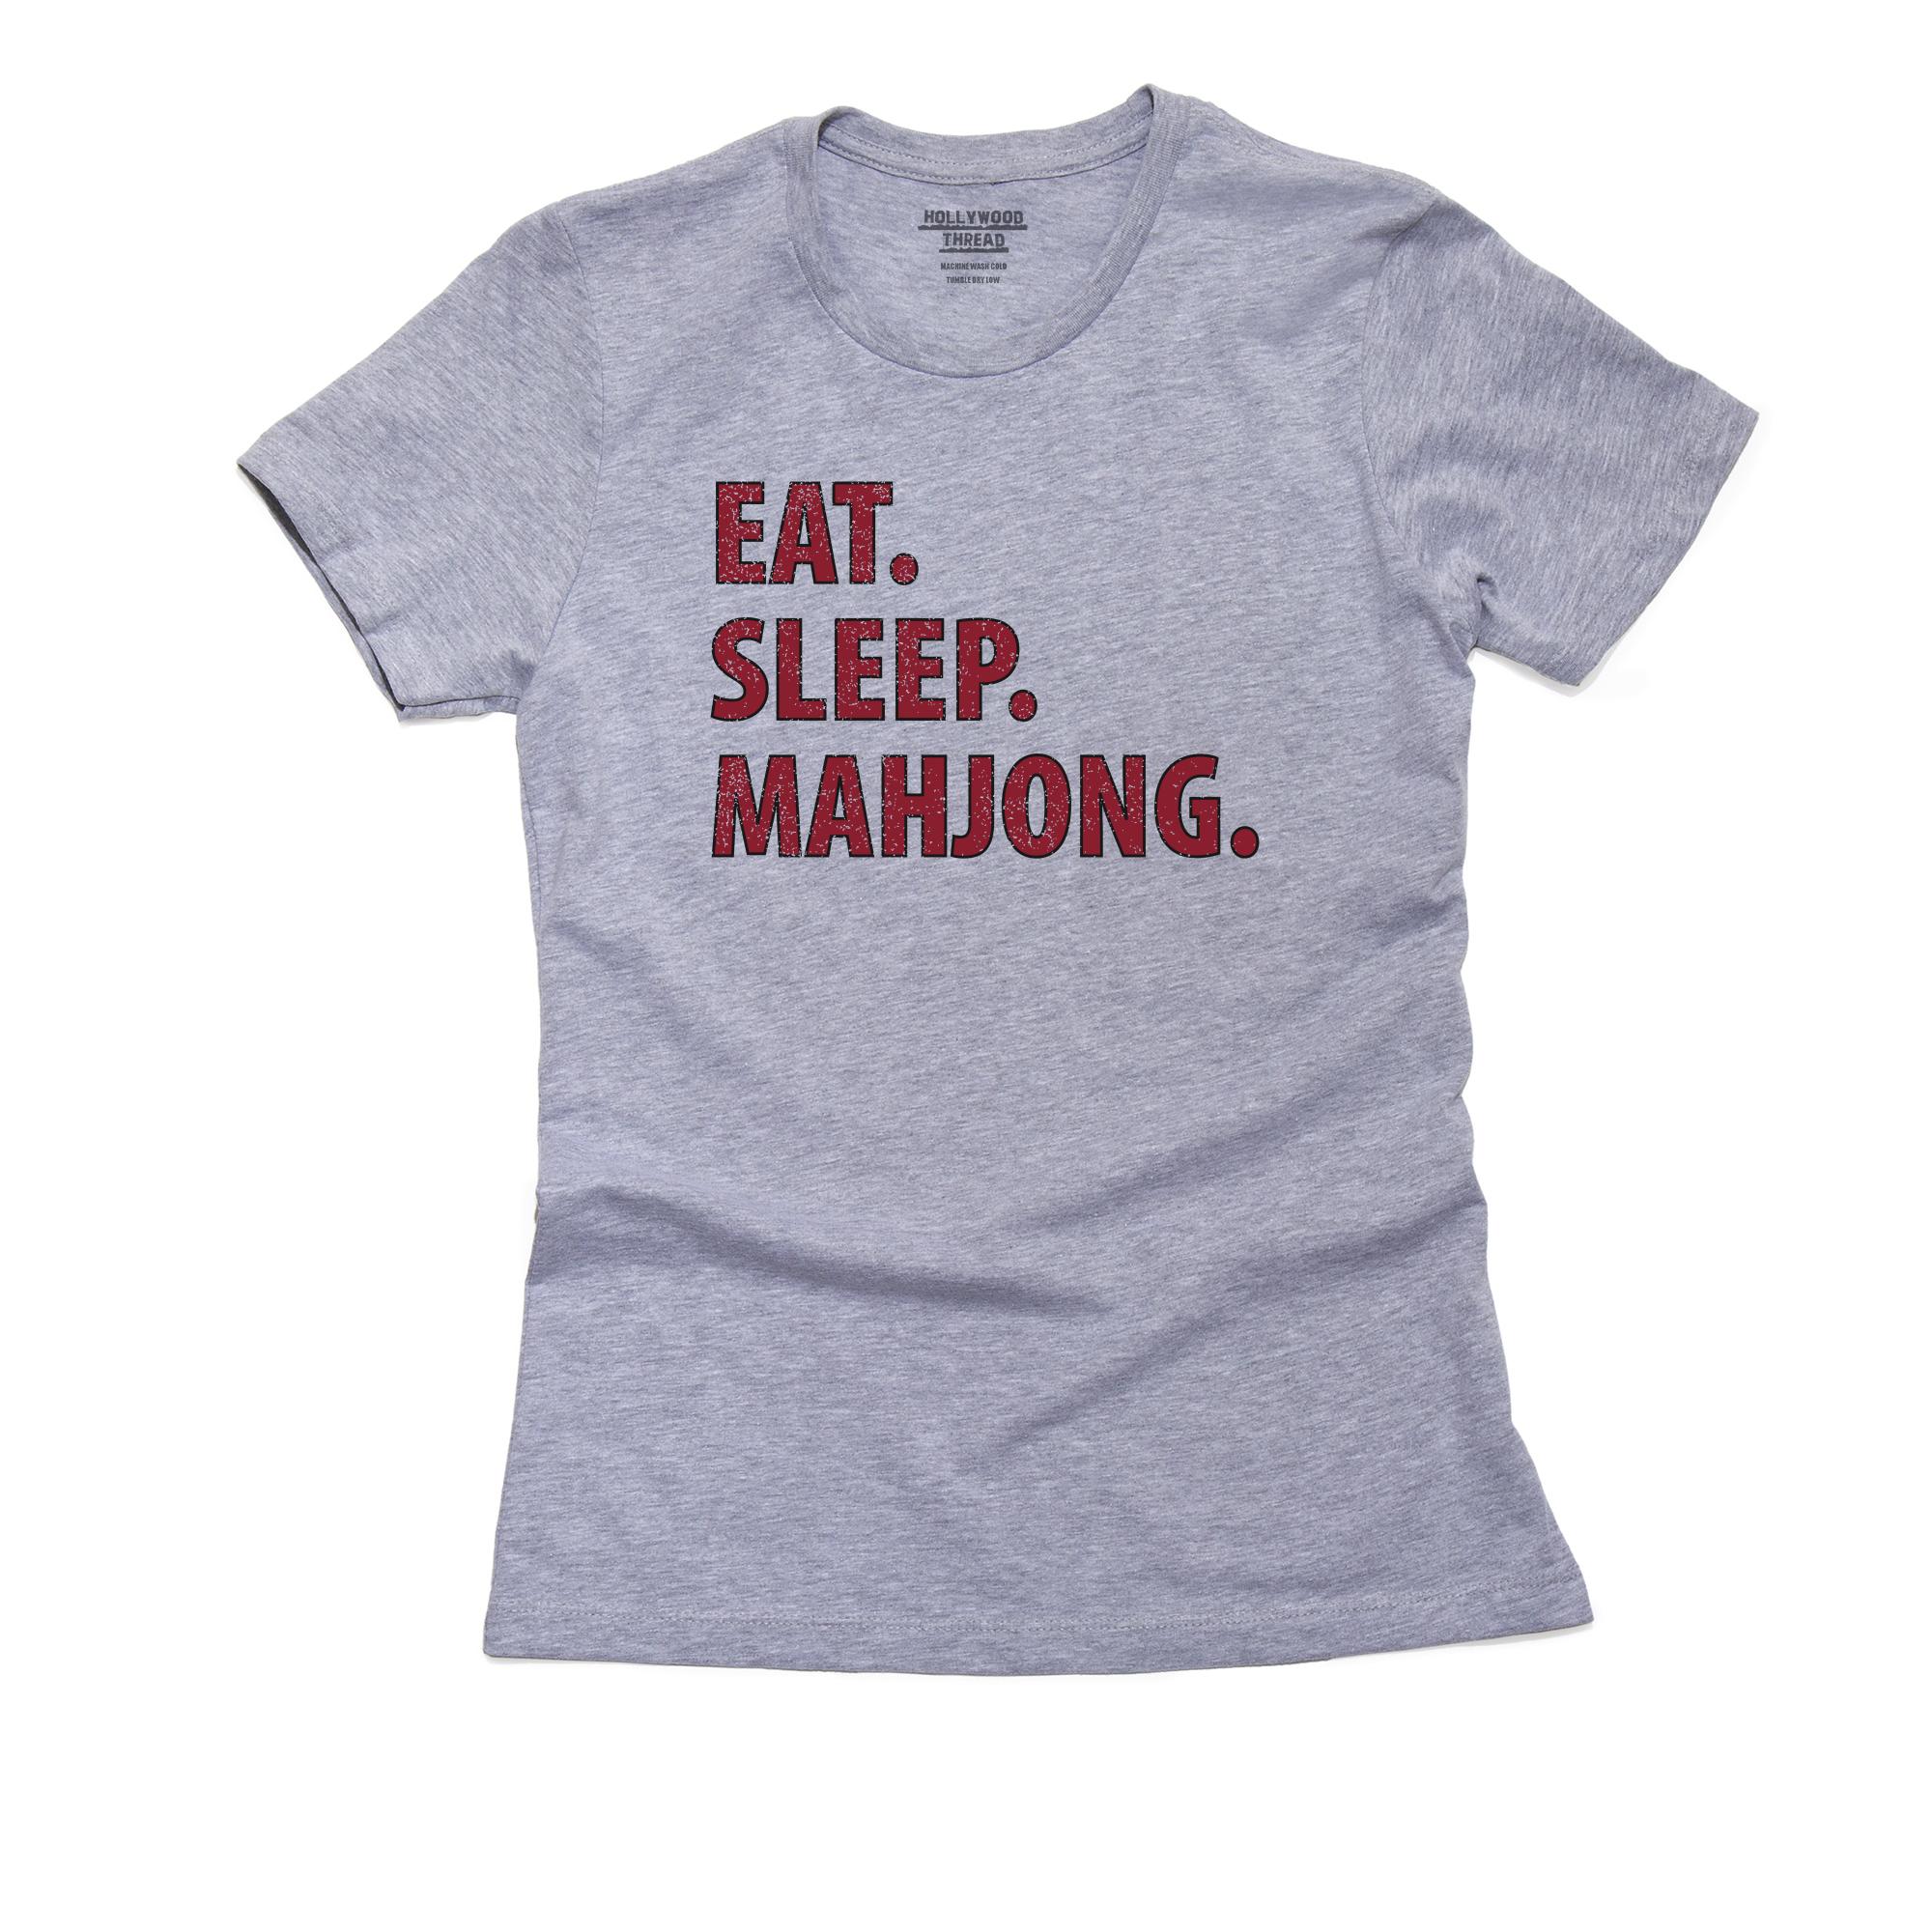 Eat Sleep. Mahjong. - Asian Game Lucky Red Front Women's Cotton Grey T-Shirt - image 1 of 2